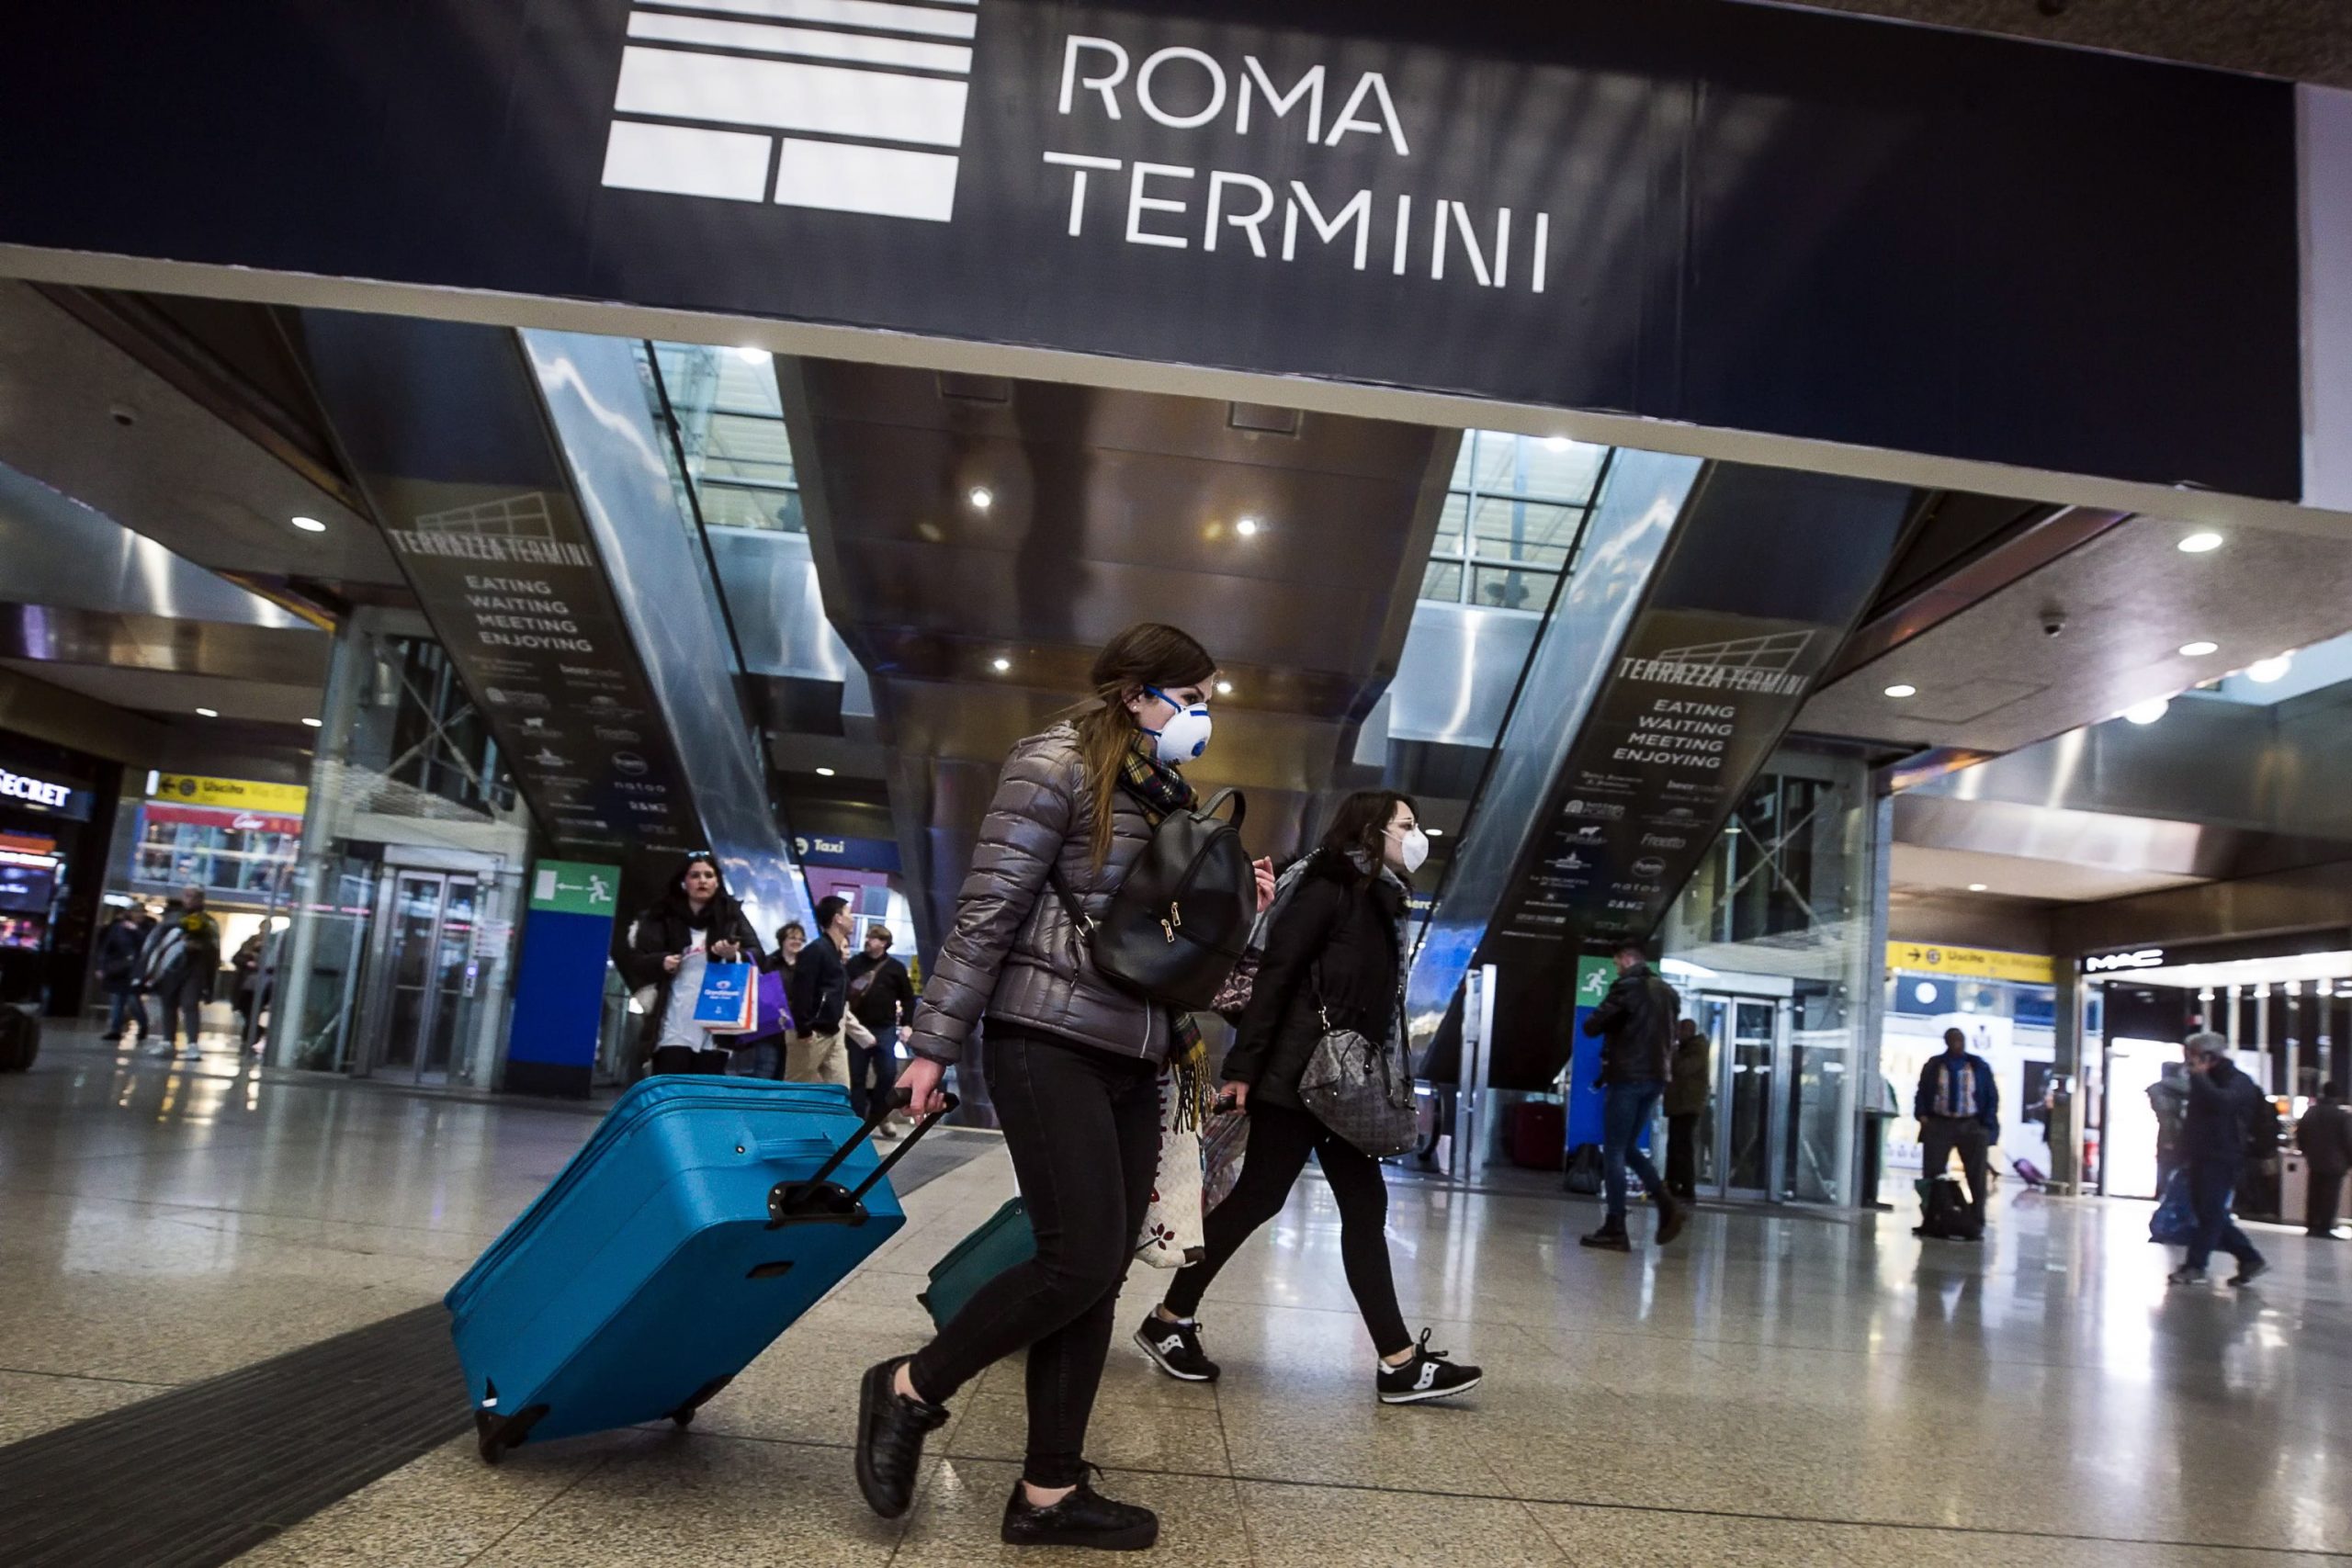 epa08244646 People wearing a protective mask walks at the Termini Station in Rome, Italy, 24 February 2020. Italian authorities announced on the day that there are over 200 confirmed cases of COVID-19 disease in the country, with at least six deaths. Precautionary measures and ordinances to tackle the spreading of the deadly virus included the closure of schools, gyms, museums and cinemas in the affected areas in northern Italy.  EPA/ANGELO CARCONI